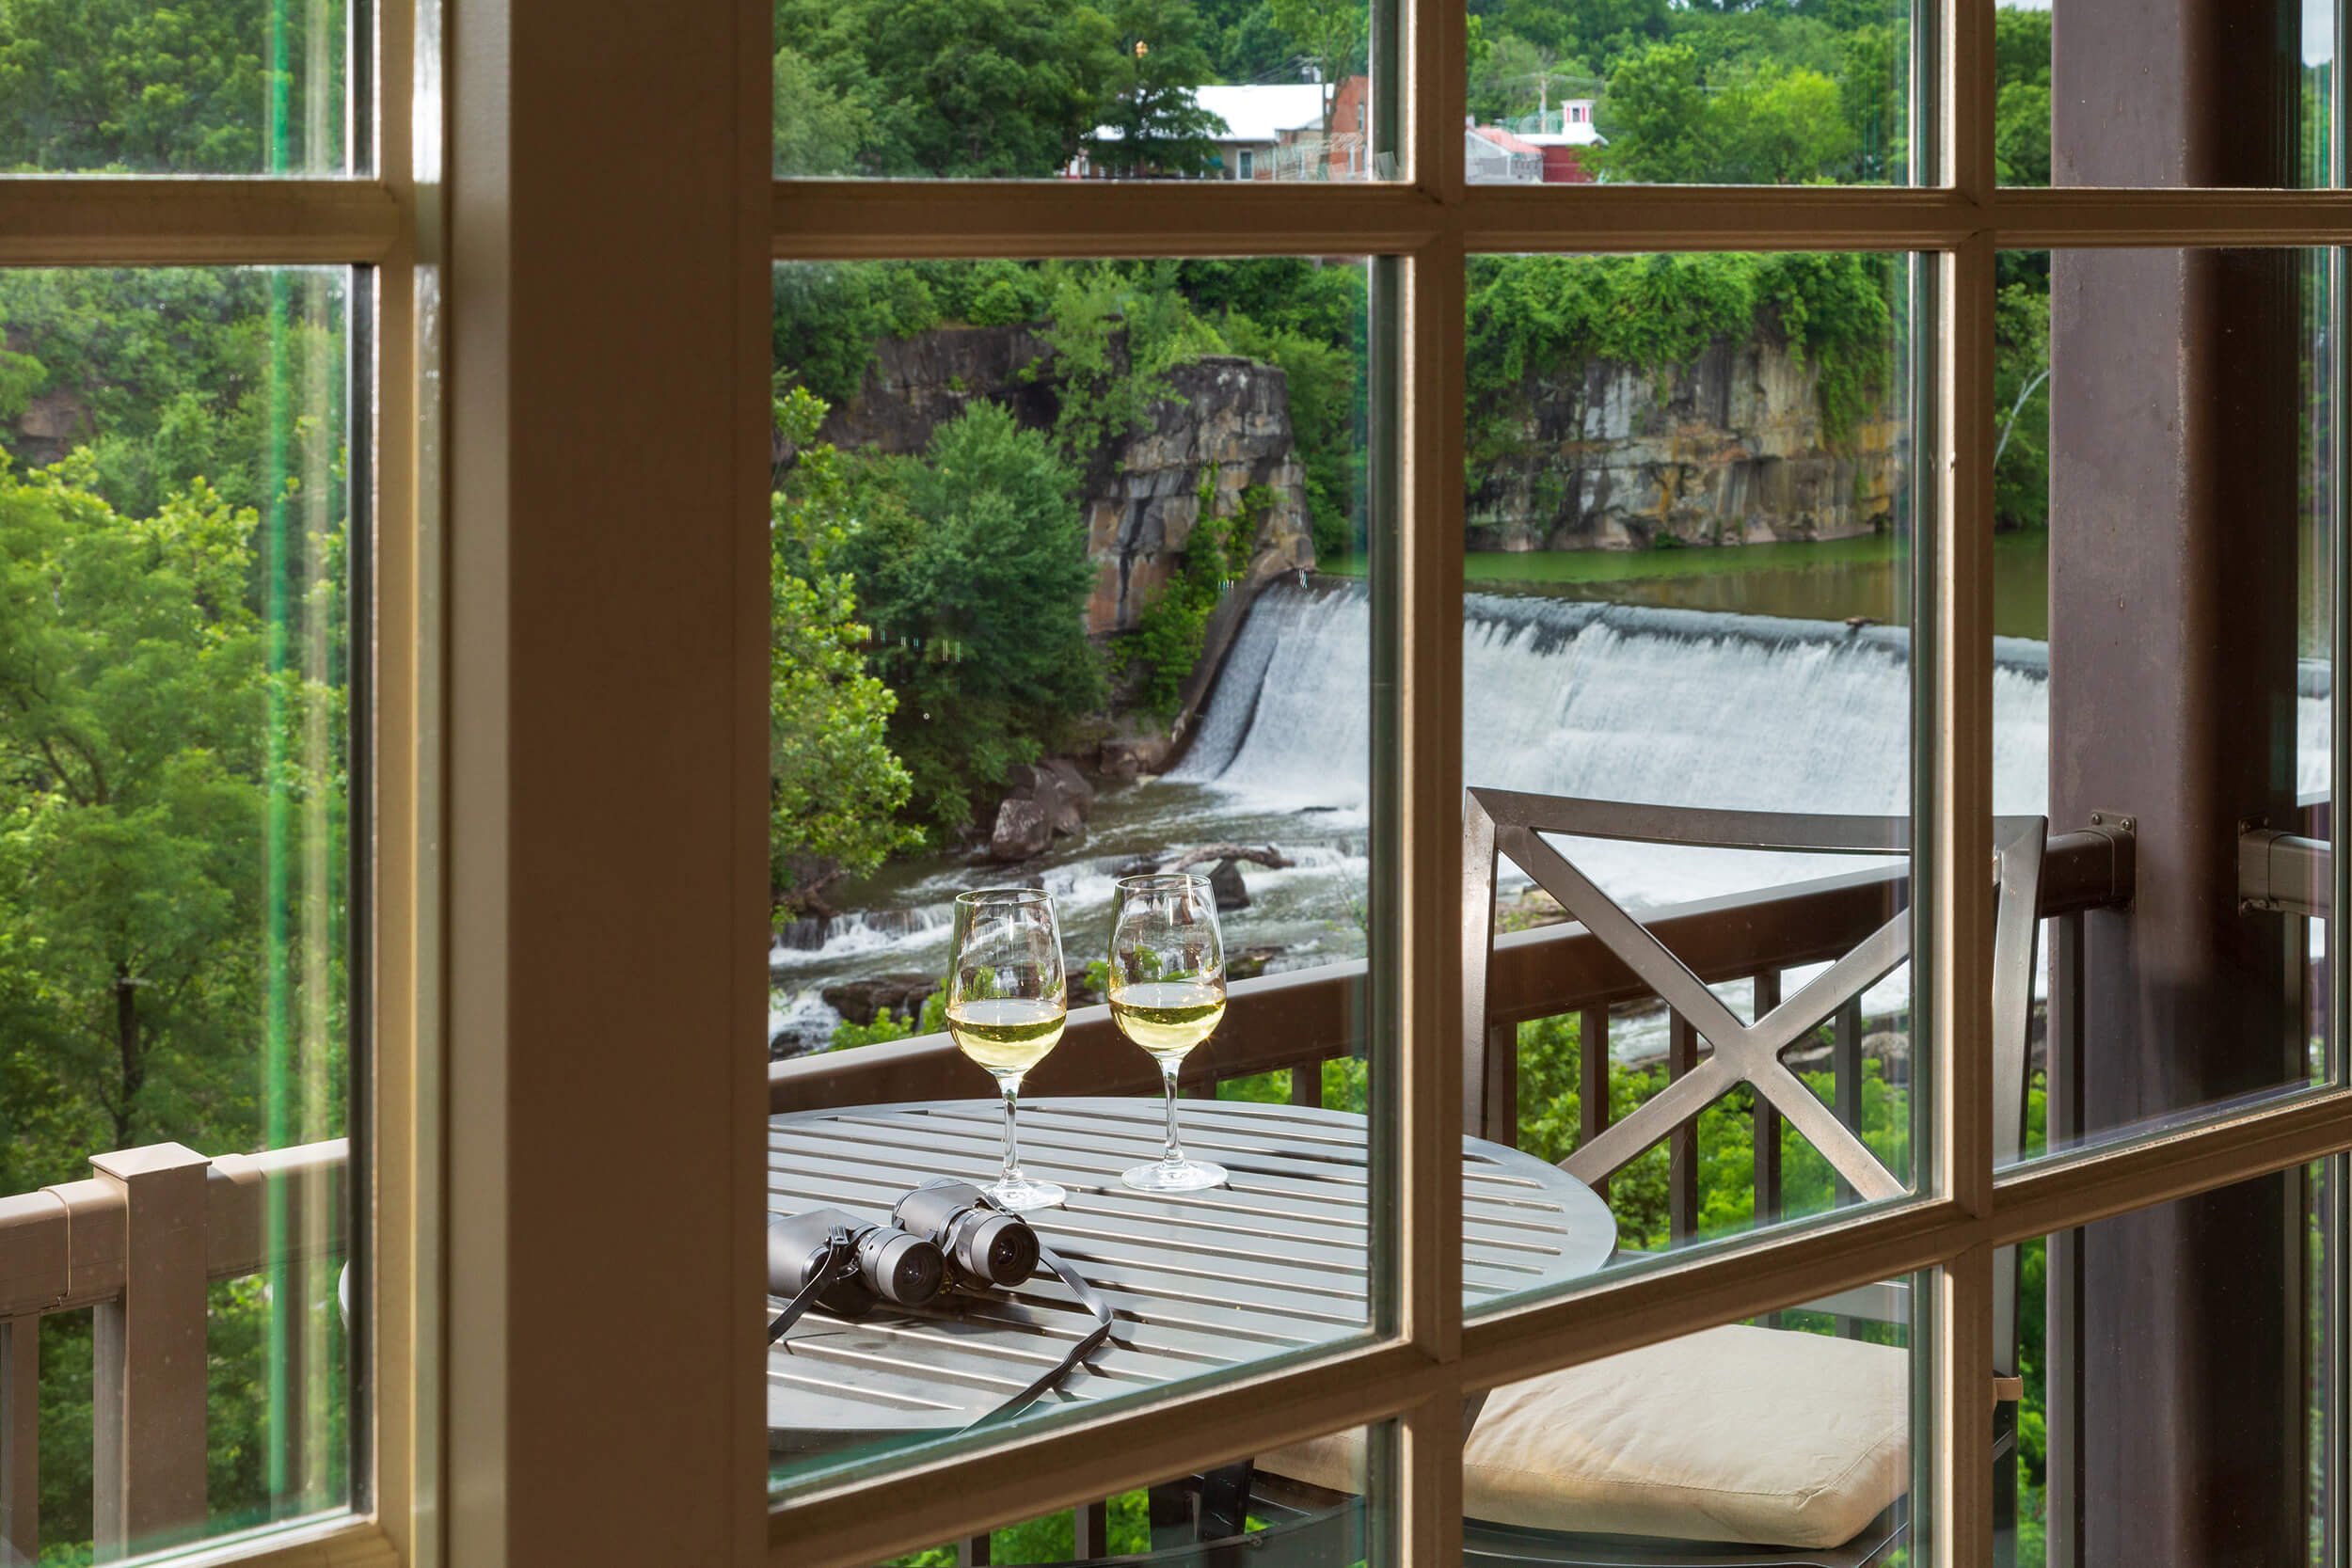 The balcony view of the Esopus Waterfall in a King Deluxe room at Diamond Mills hotel in Saugerties, NY